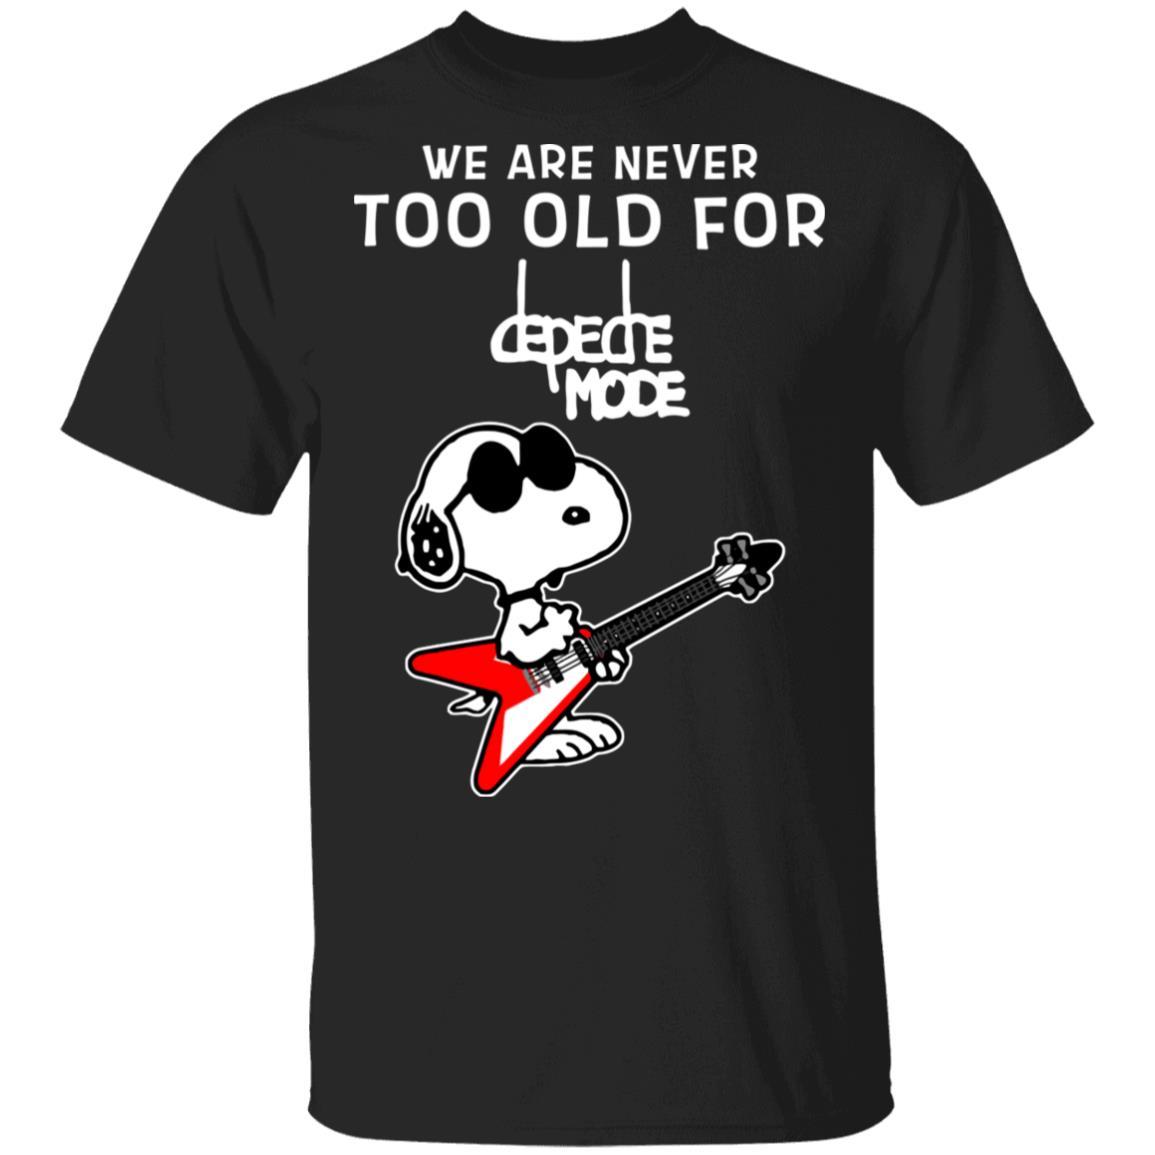 [Image: we-are-never-too-old-for-depeche-mode-t-...1584414010]